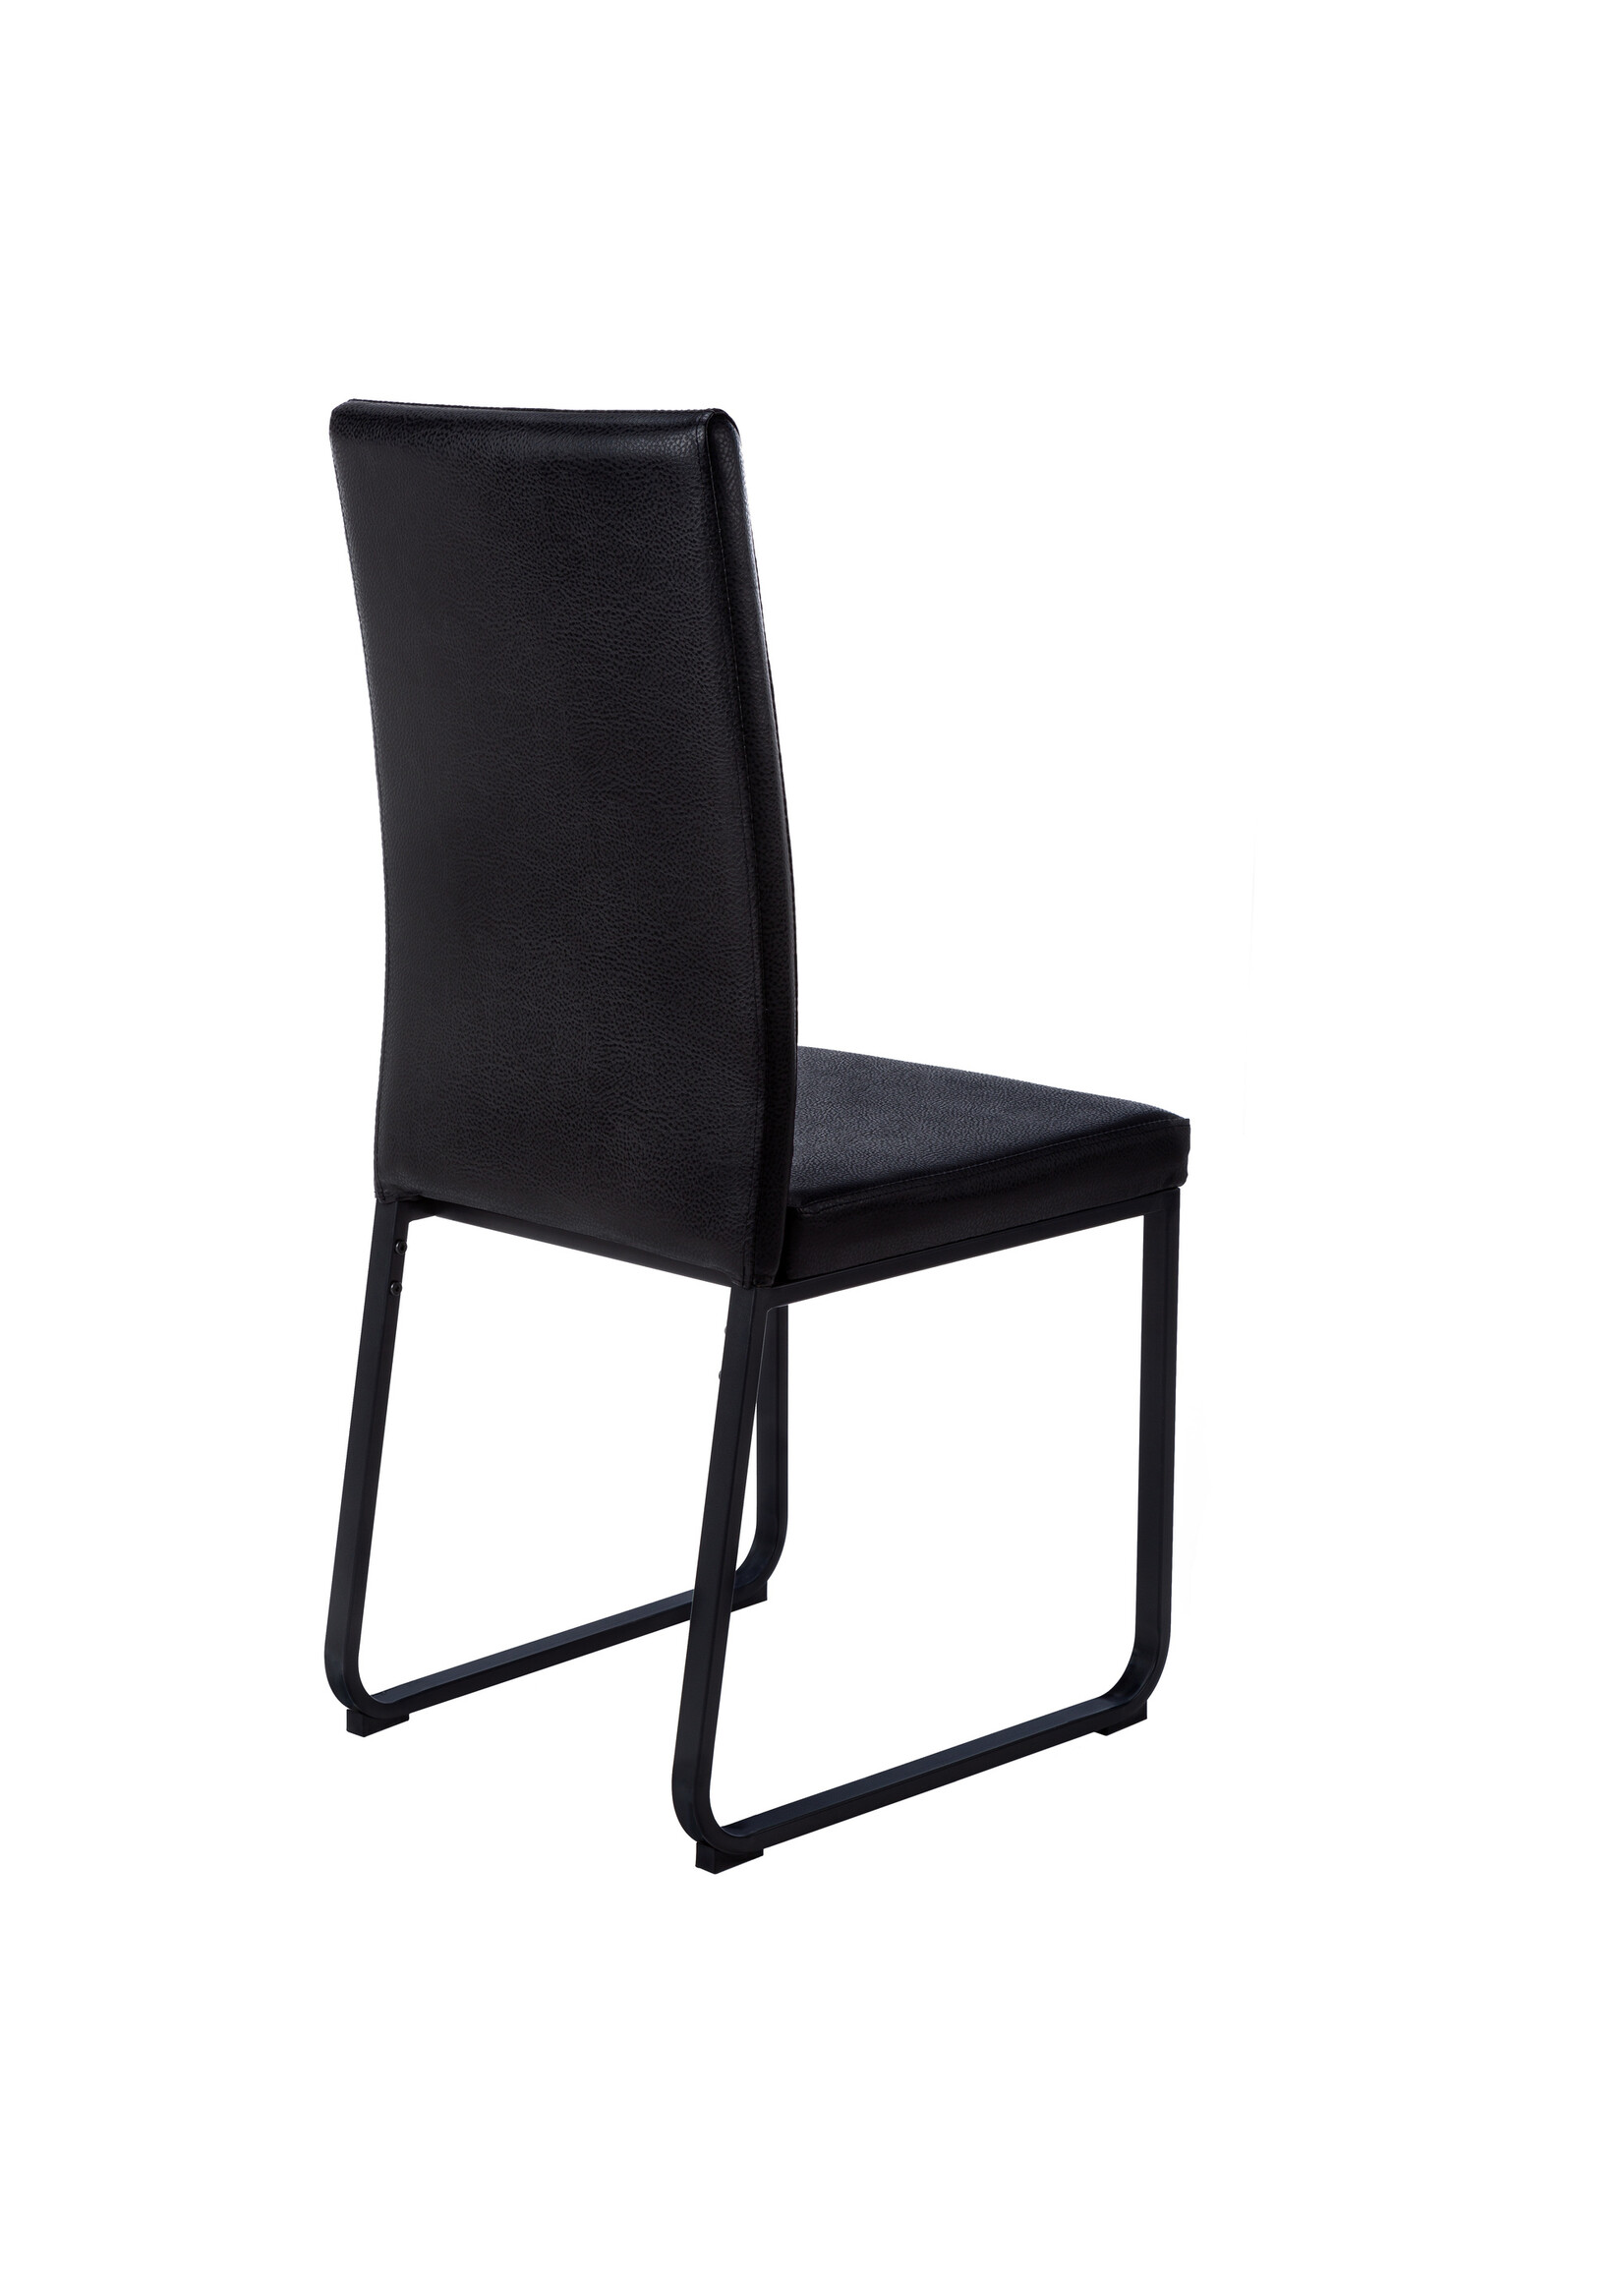 DINING CHAIR - 2PCS / 38"H / BLACK LEATHER-LOOK / BLACK